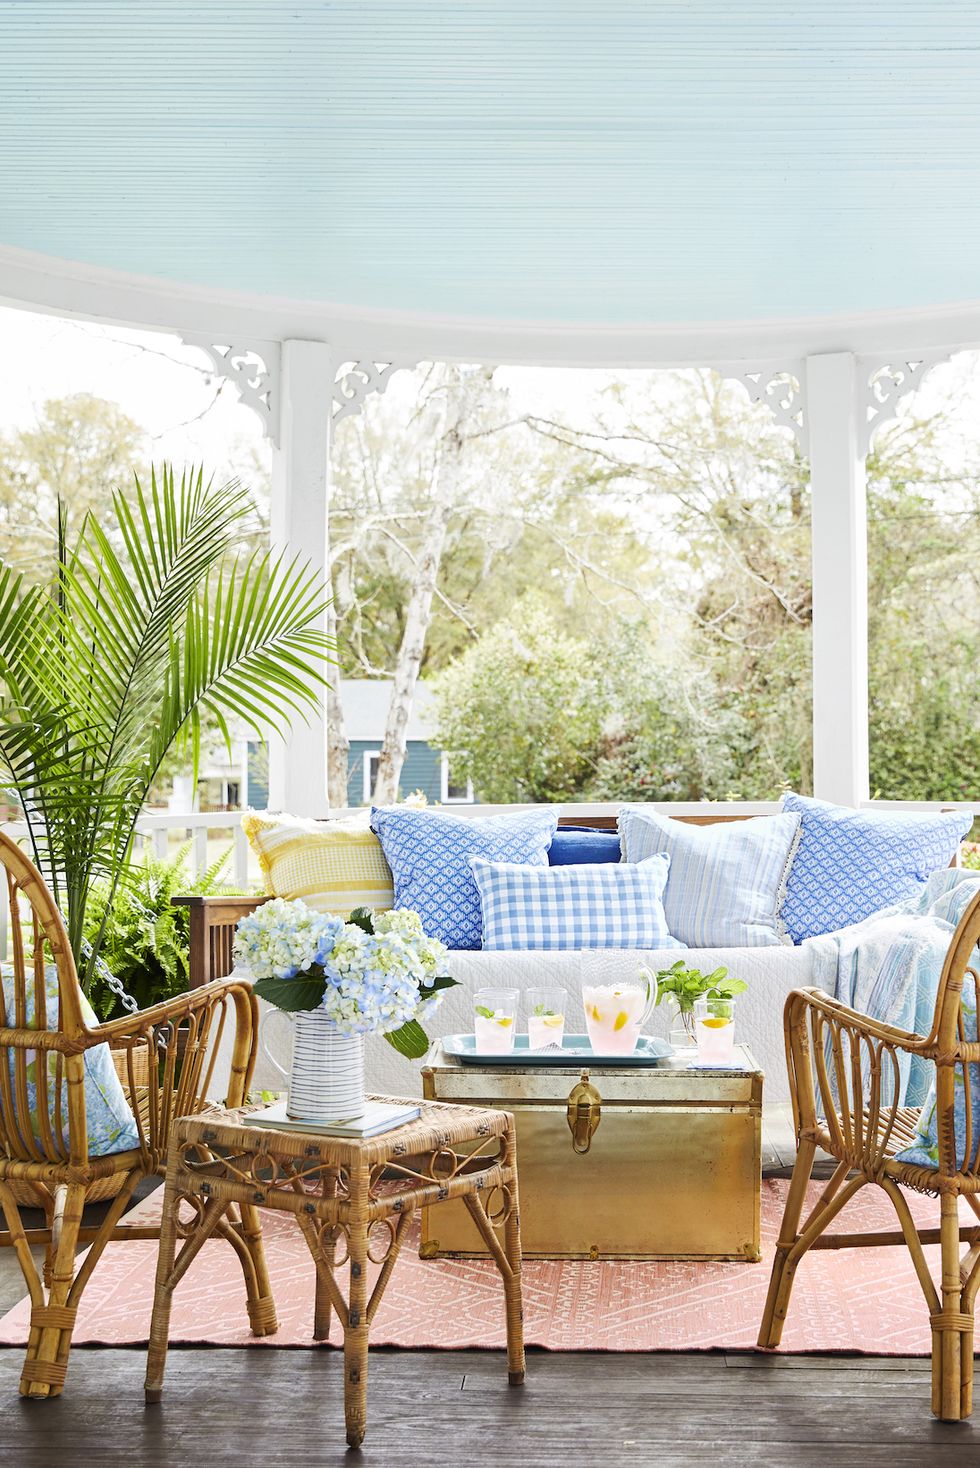 Best Patio Decorating Tips From Design Experts